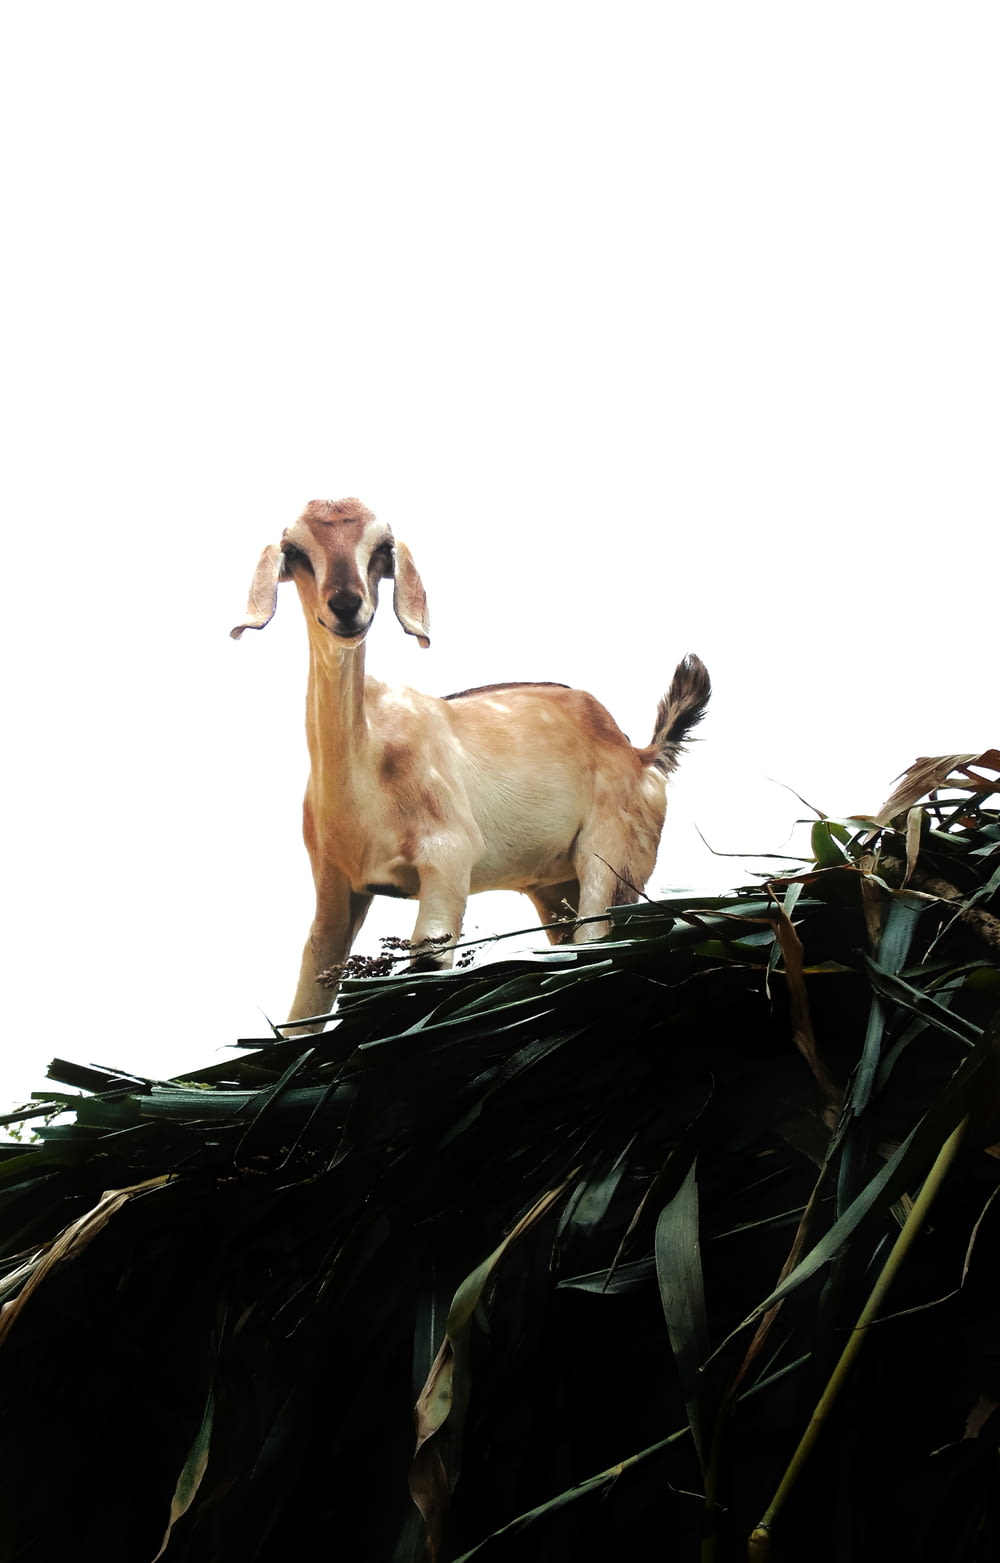 a goat standing on a tree branch